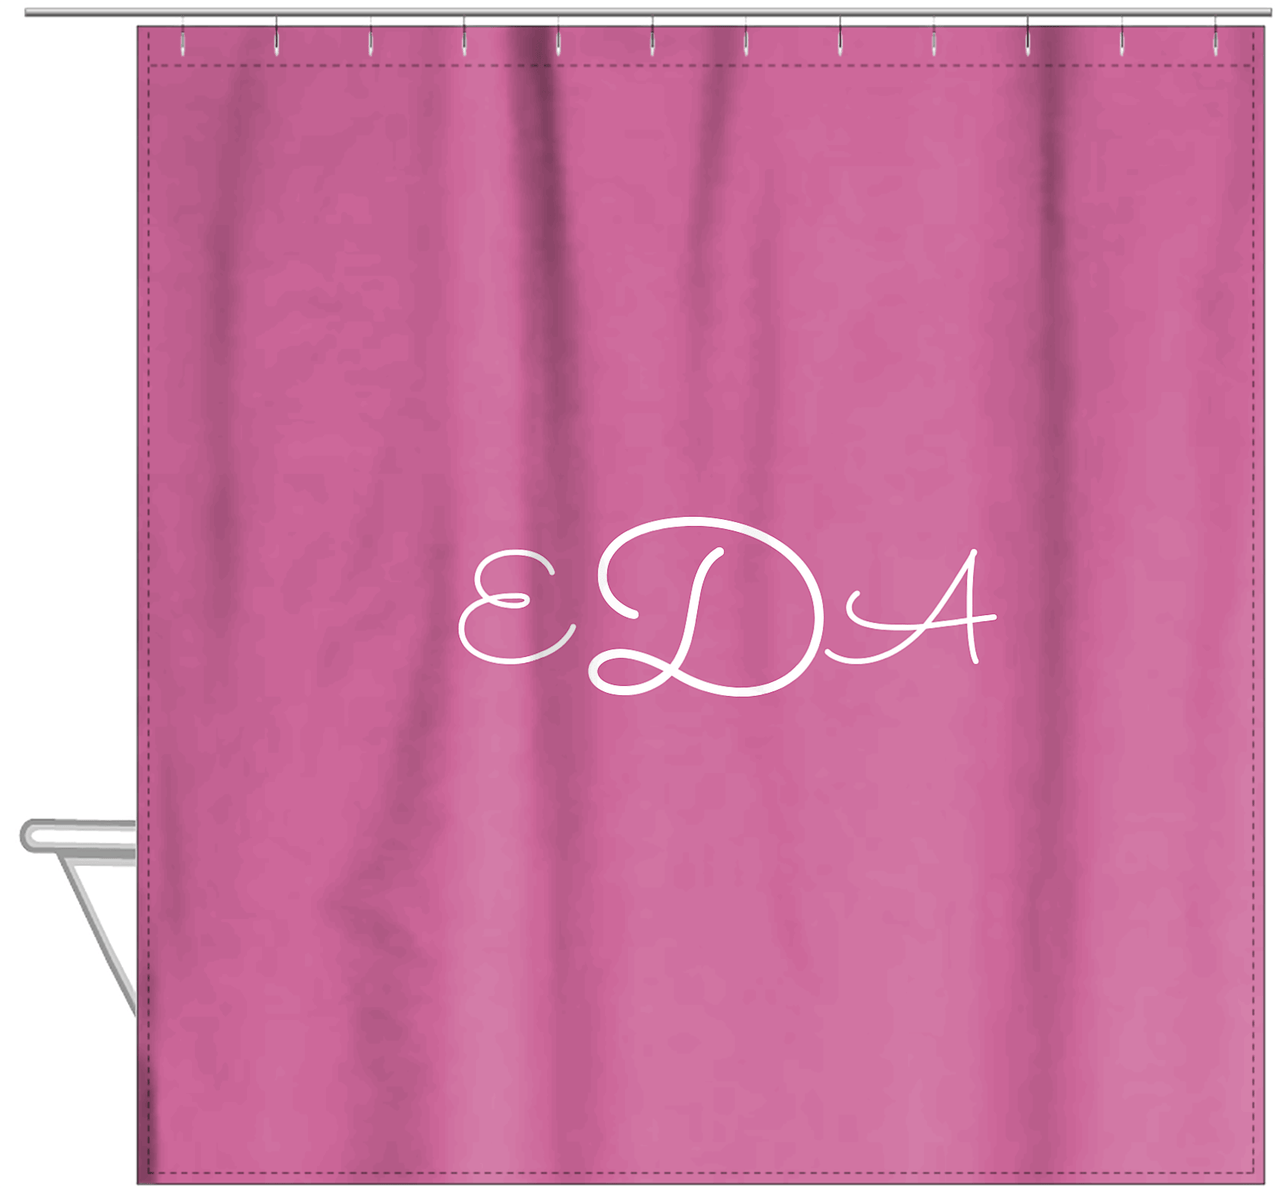 Personalized Solid Color Shower Curtain - Pink Background - Monogram - Hanging View